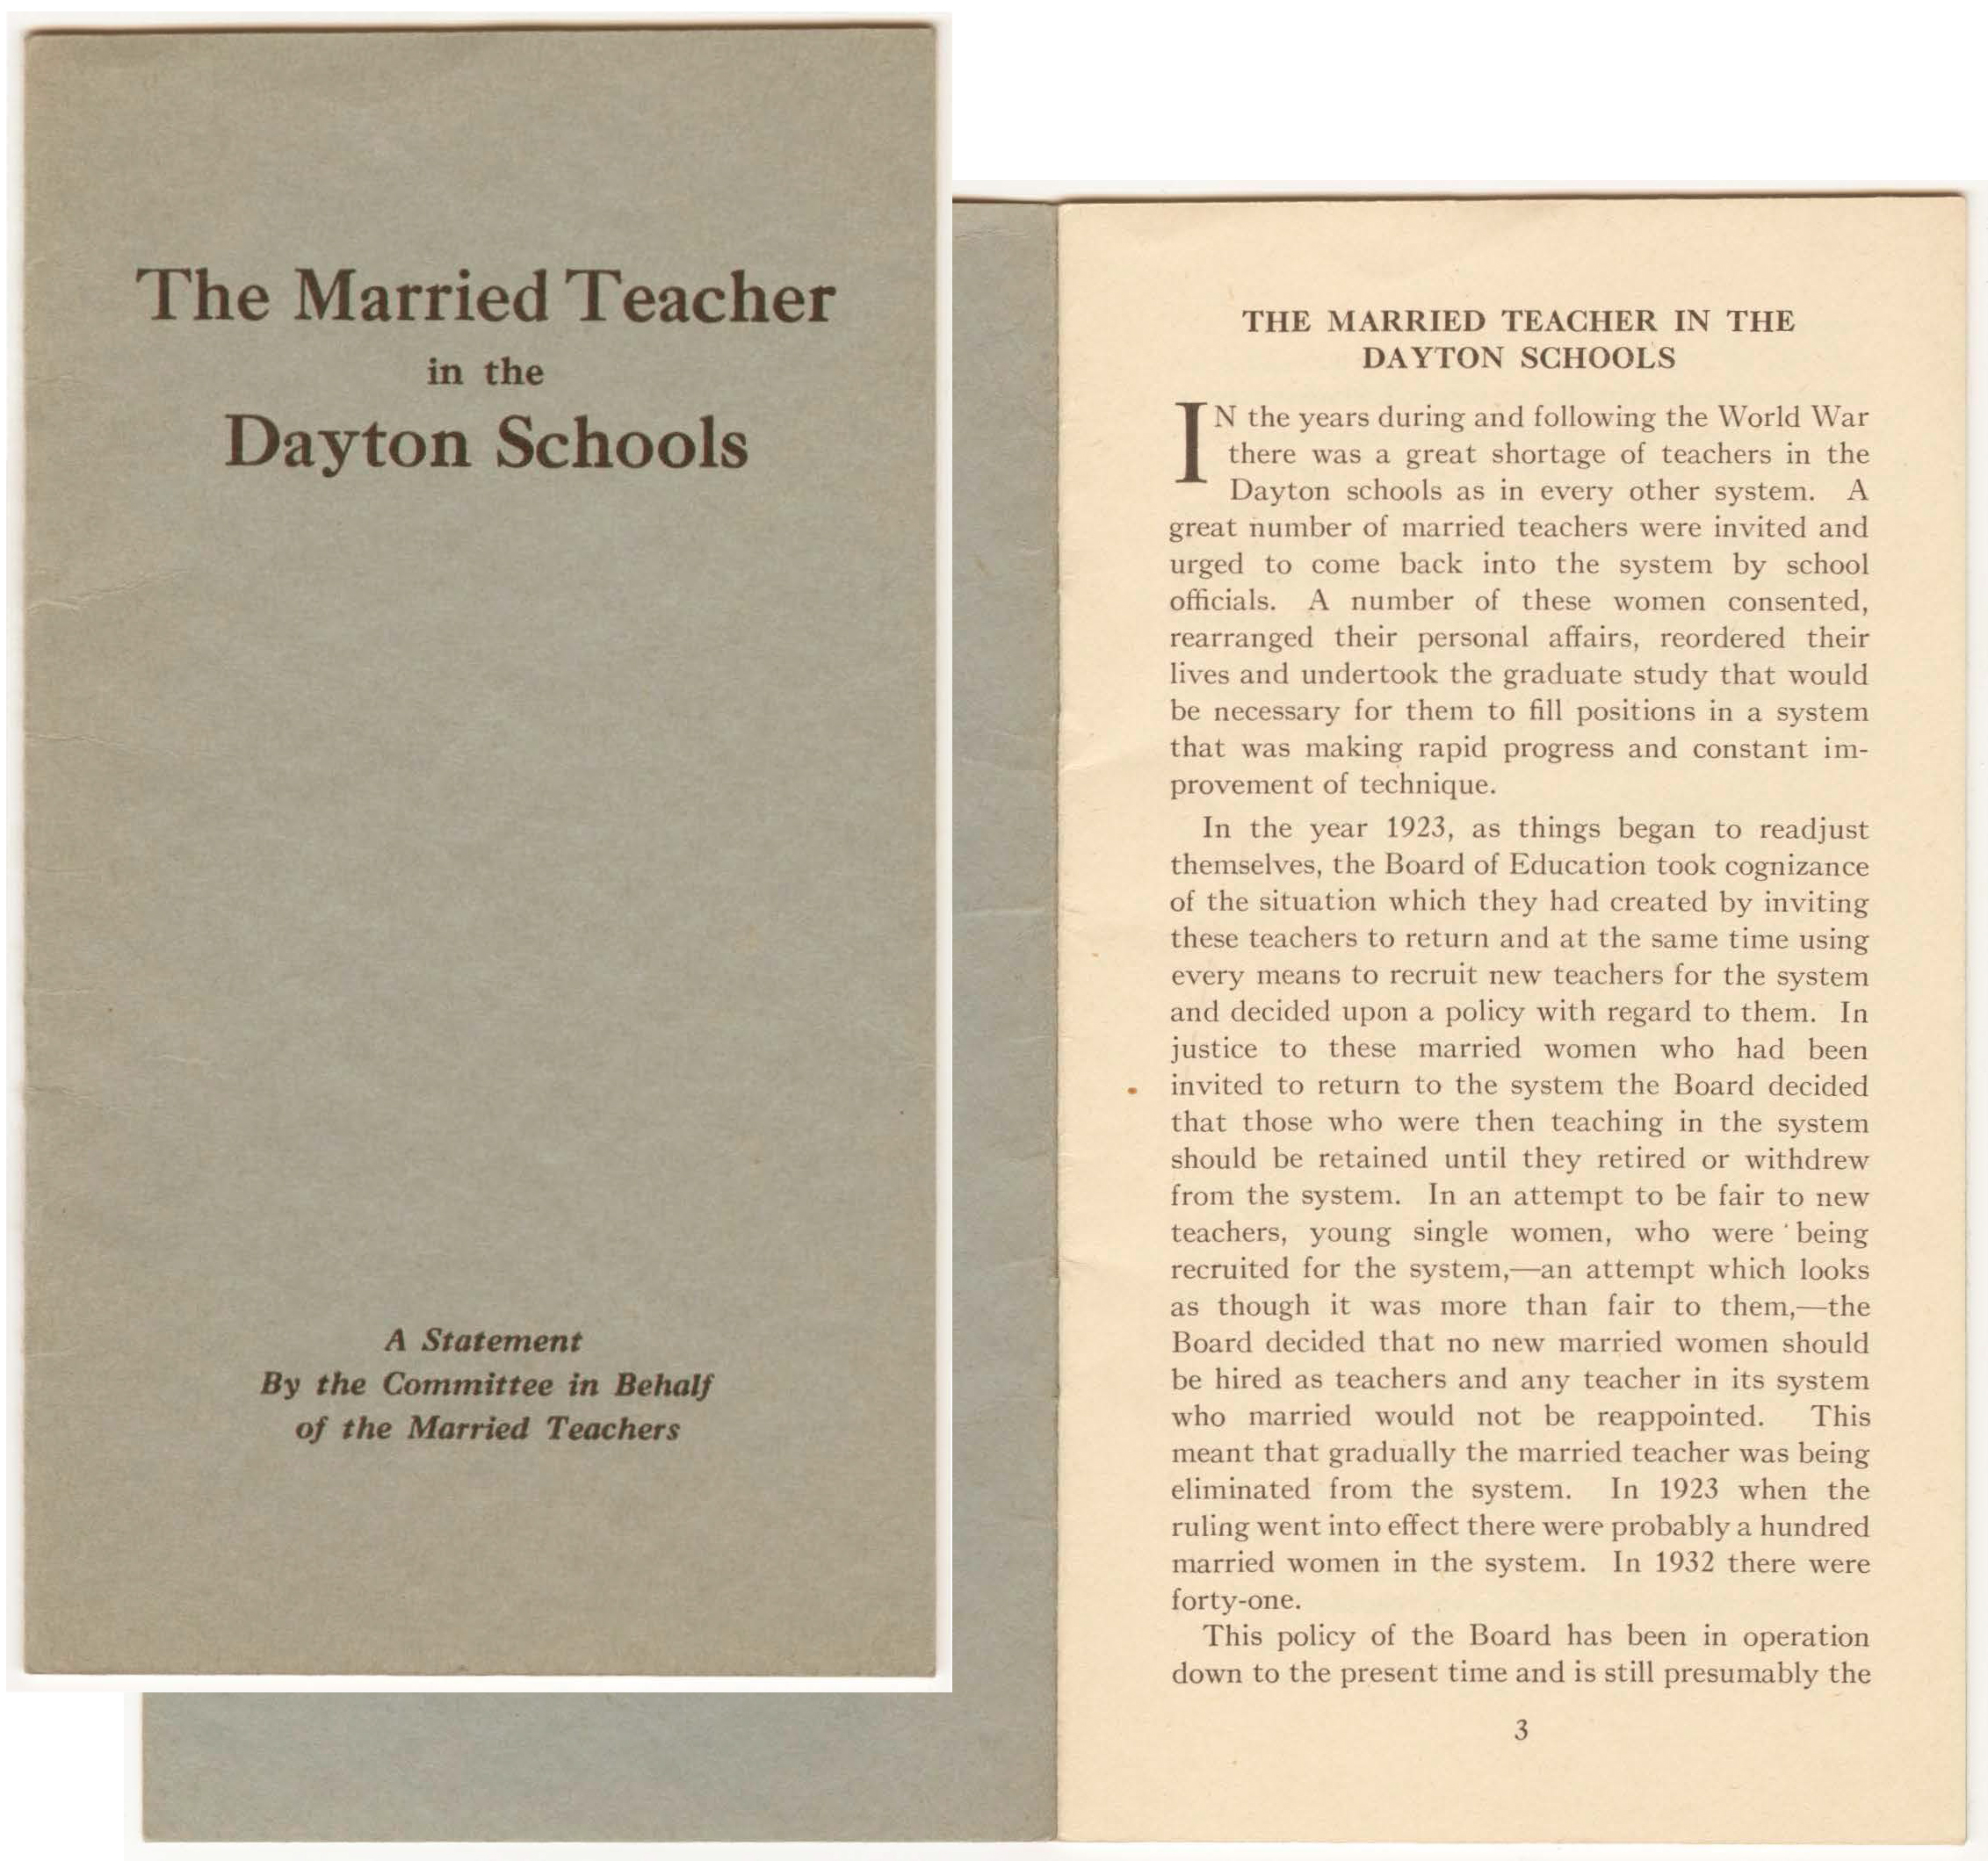 The Married Teacher in the Dayton Schools pamphlet, circa 1933 (view entire pamphlet online, ms91_01_03_01)